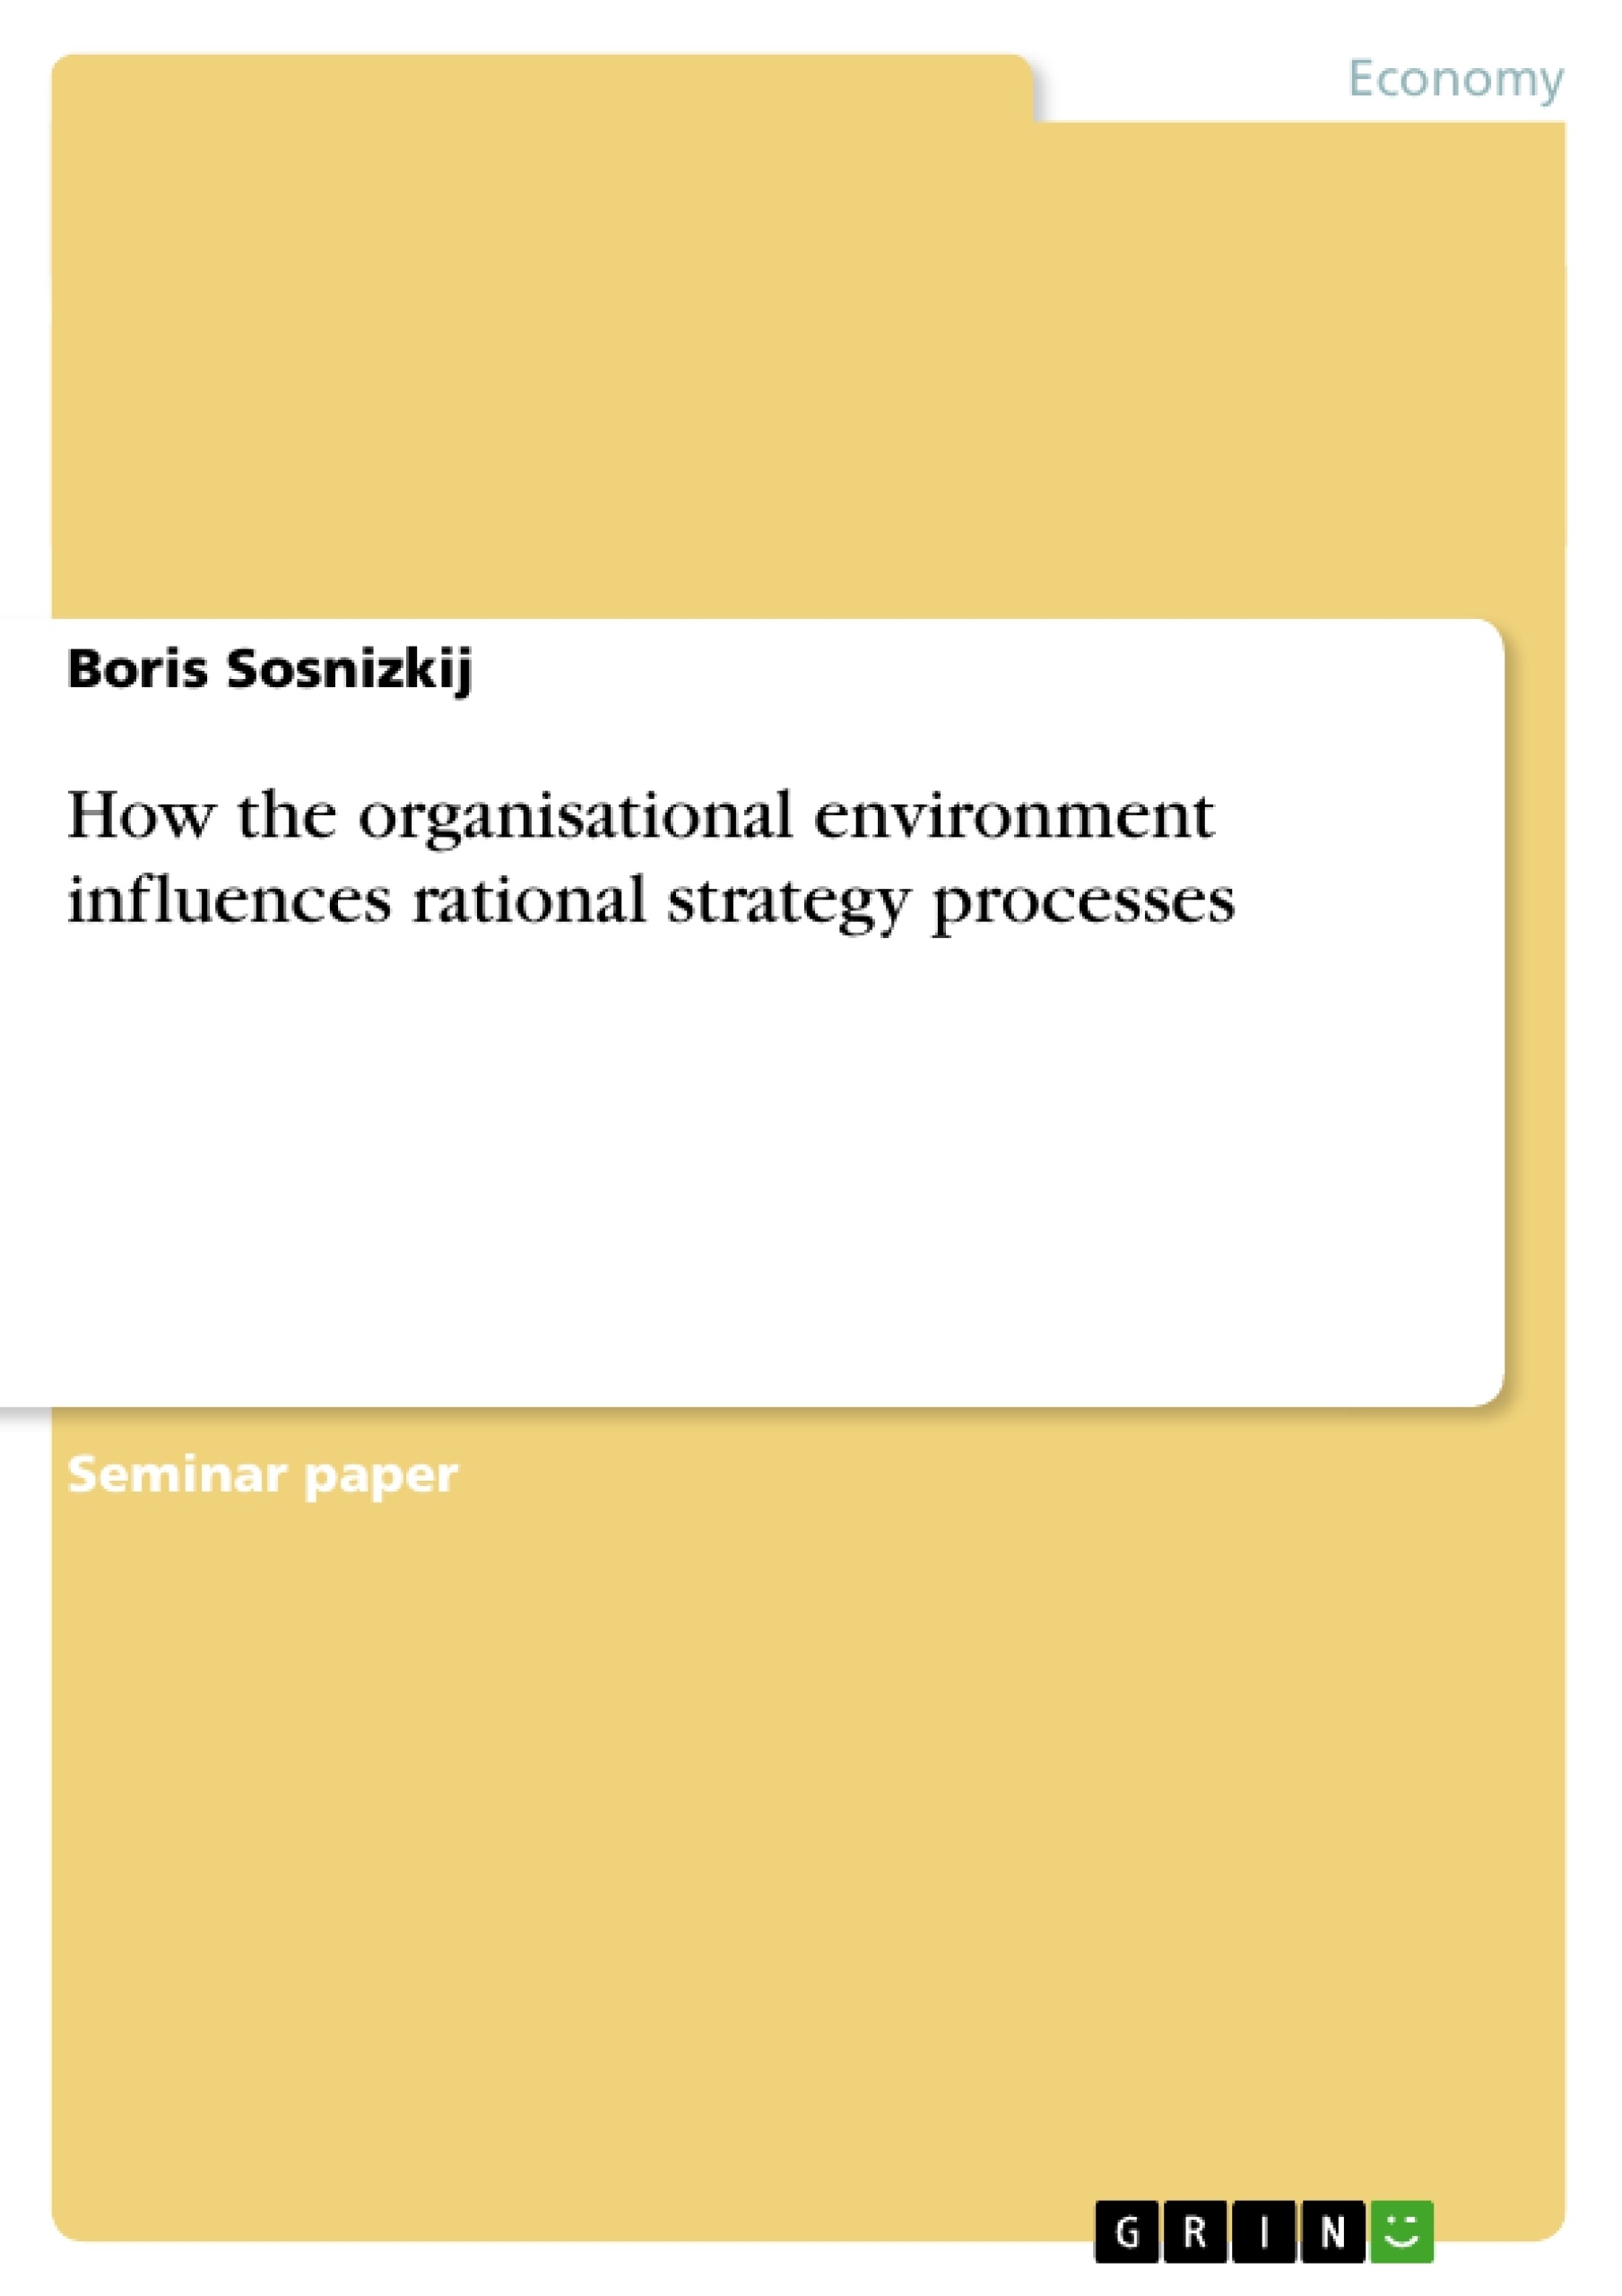 Título: How the organisational environment influences rational strategy processes